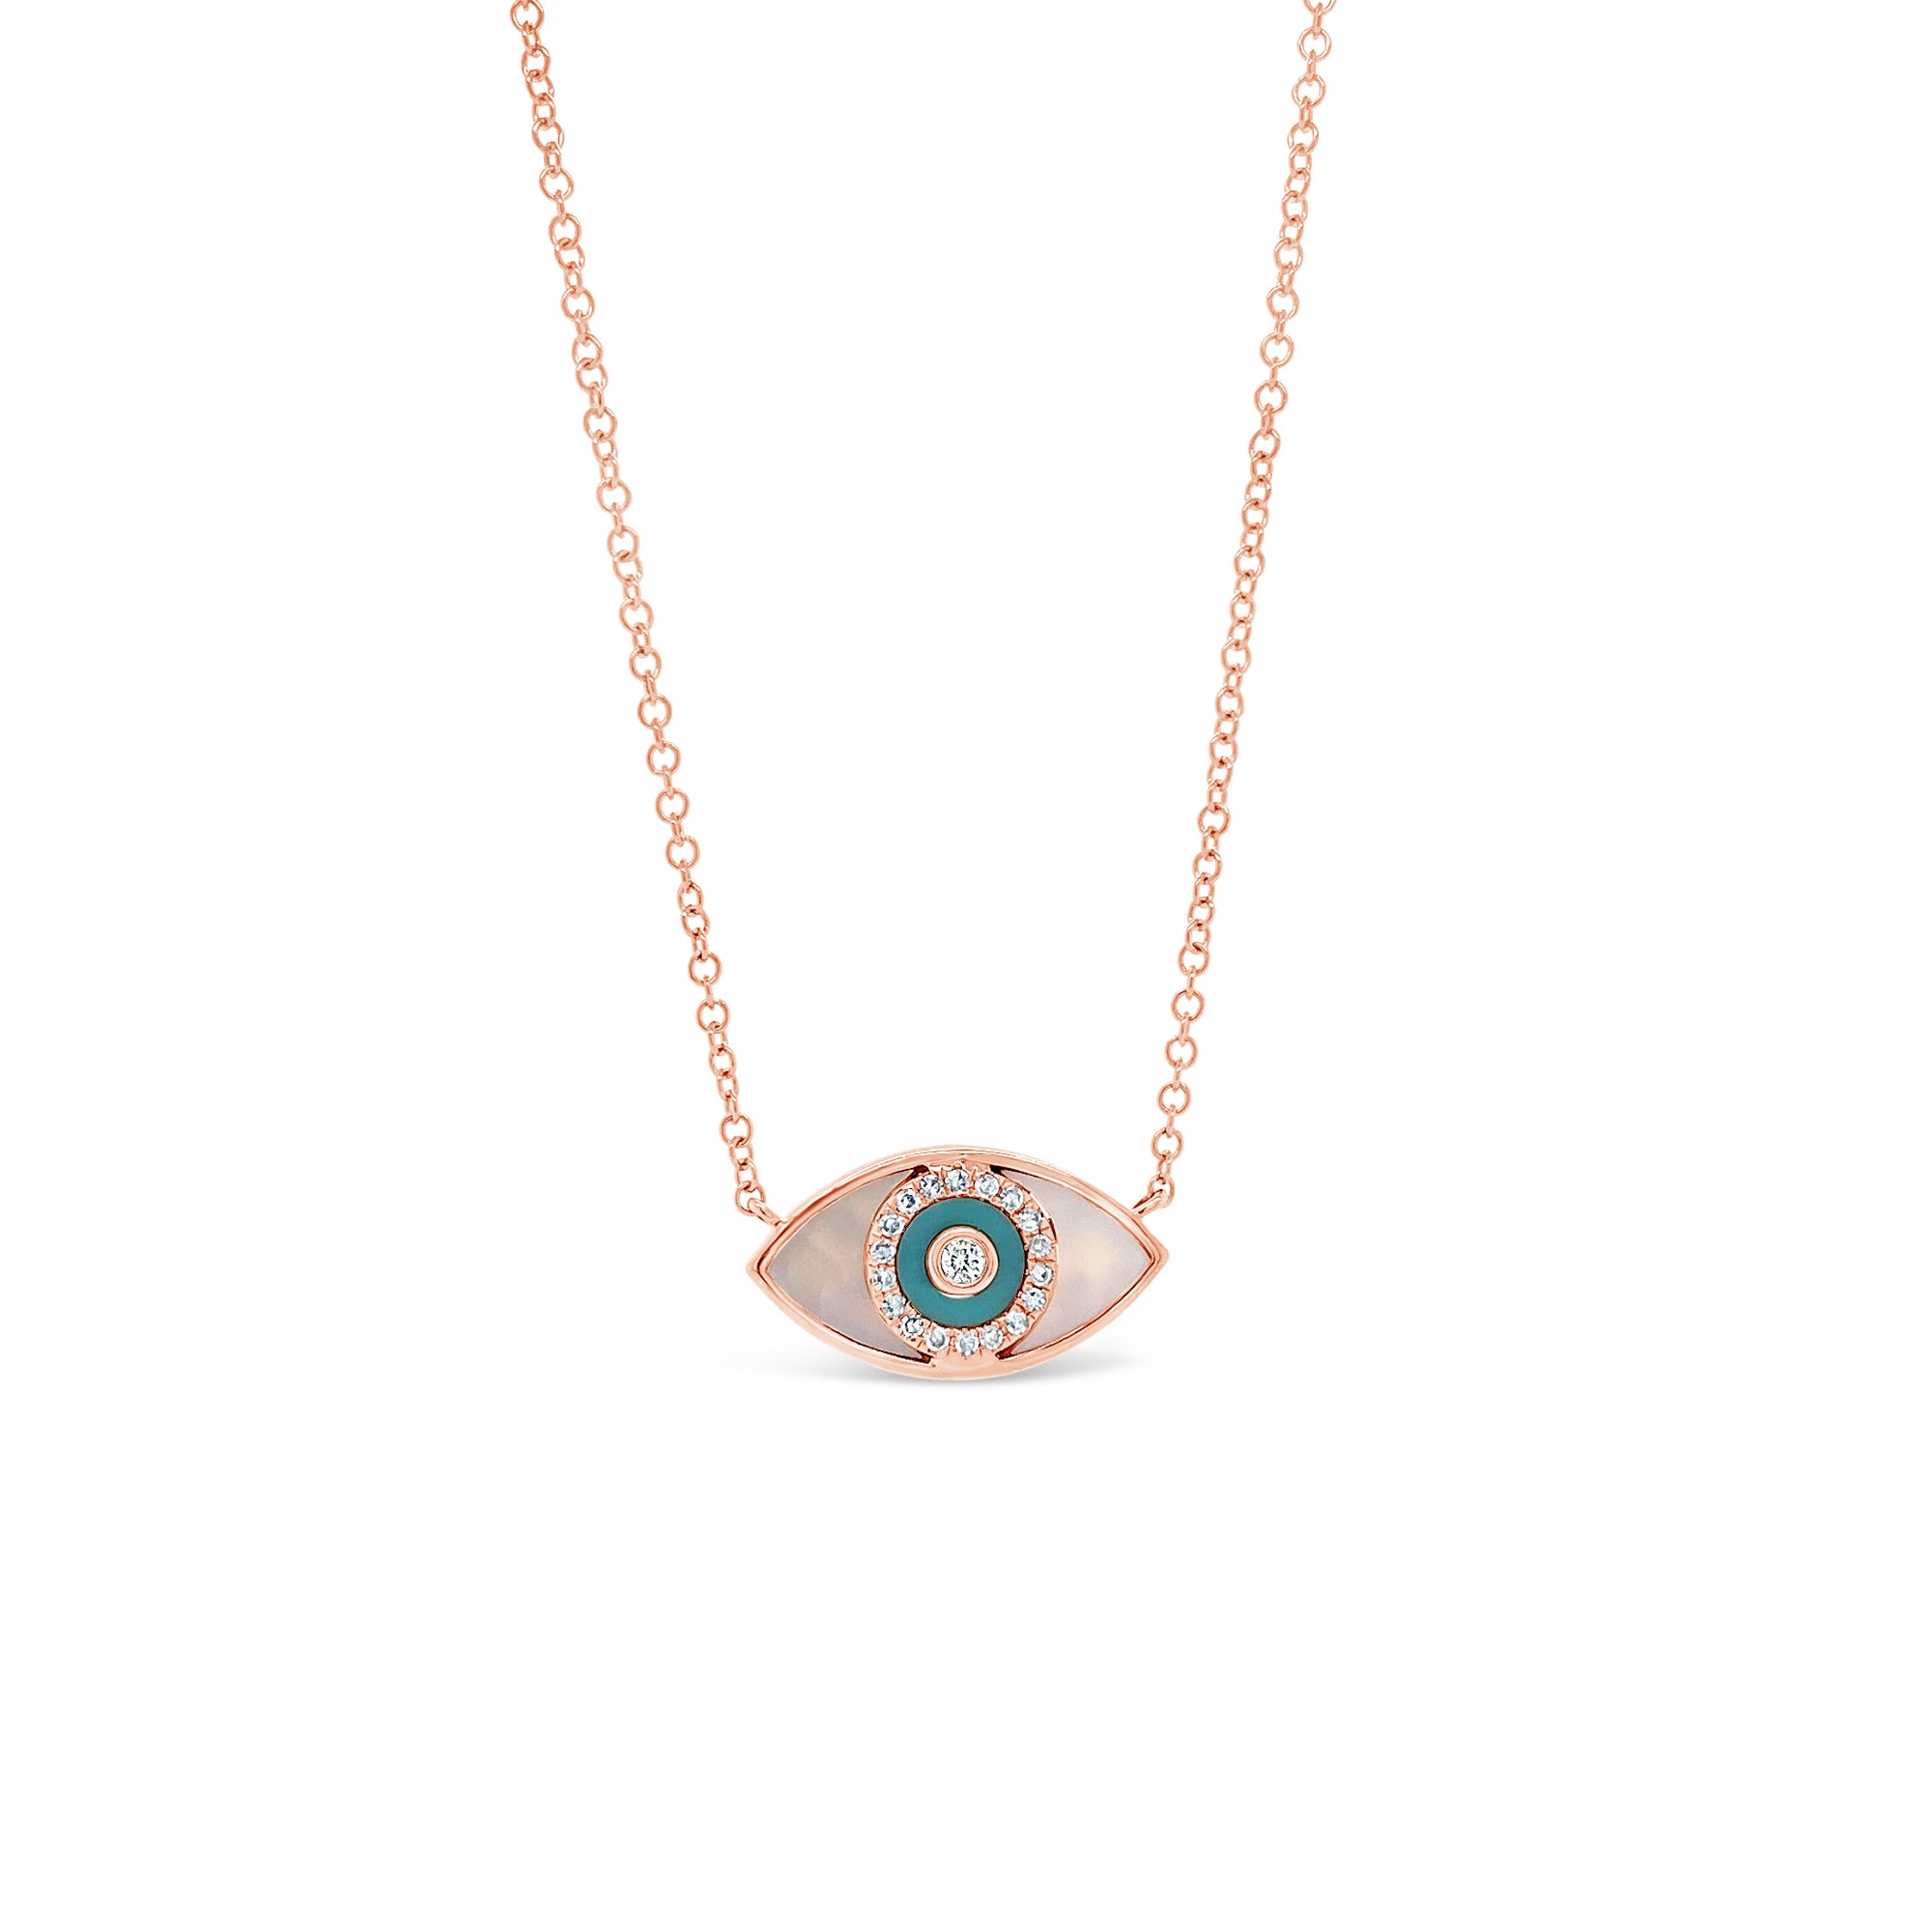 Mother of Pearl & Diamond Evil Eye Pendant  - 14K gold weighing 3.06 grams  - 19 round diamonds totaling 0.07 carats  - 0.15 ct white topaz